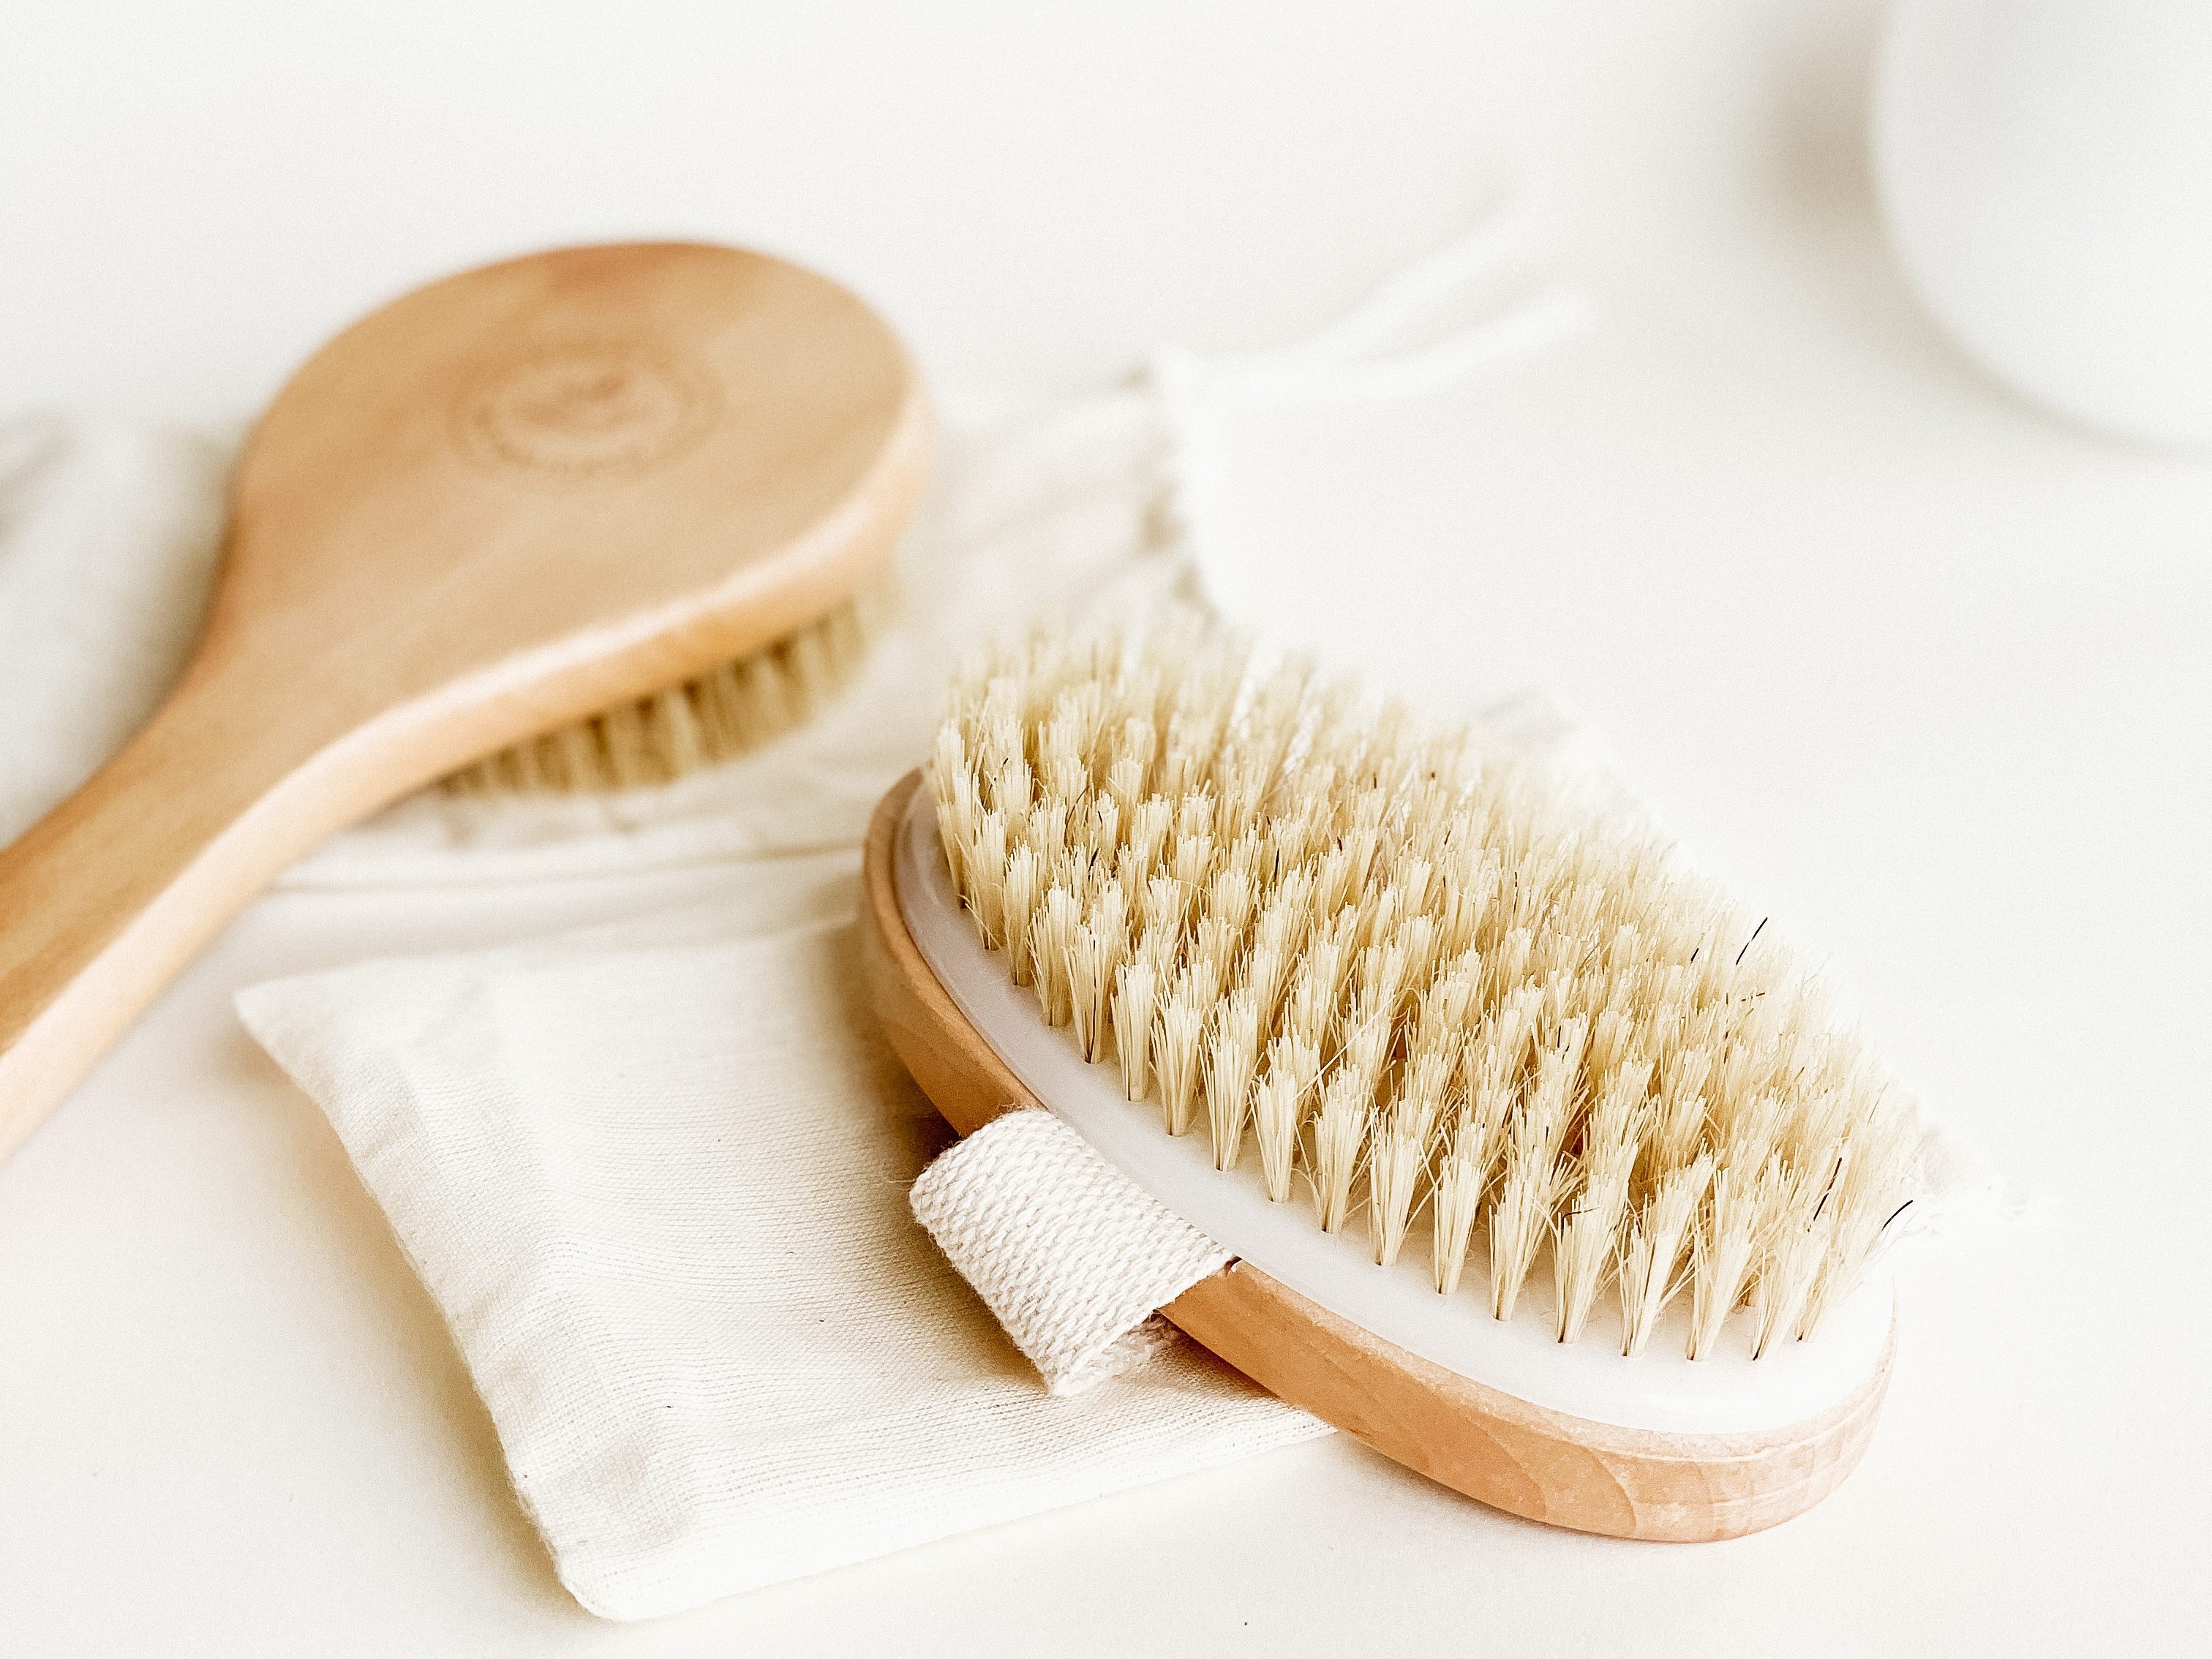 Reviving an Age-Old Practice: The Benefits of Dry Brushing